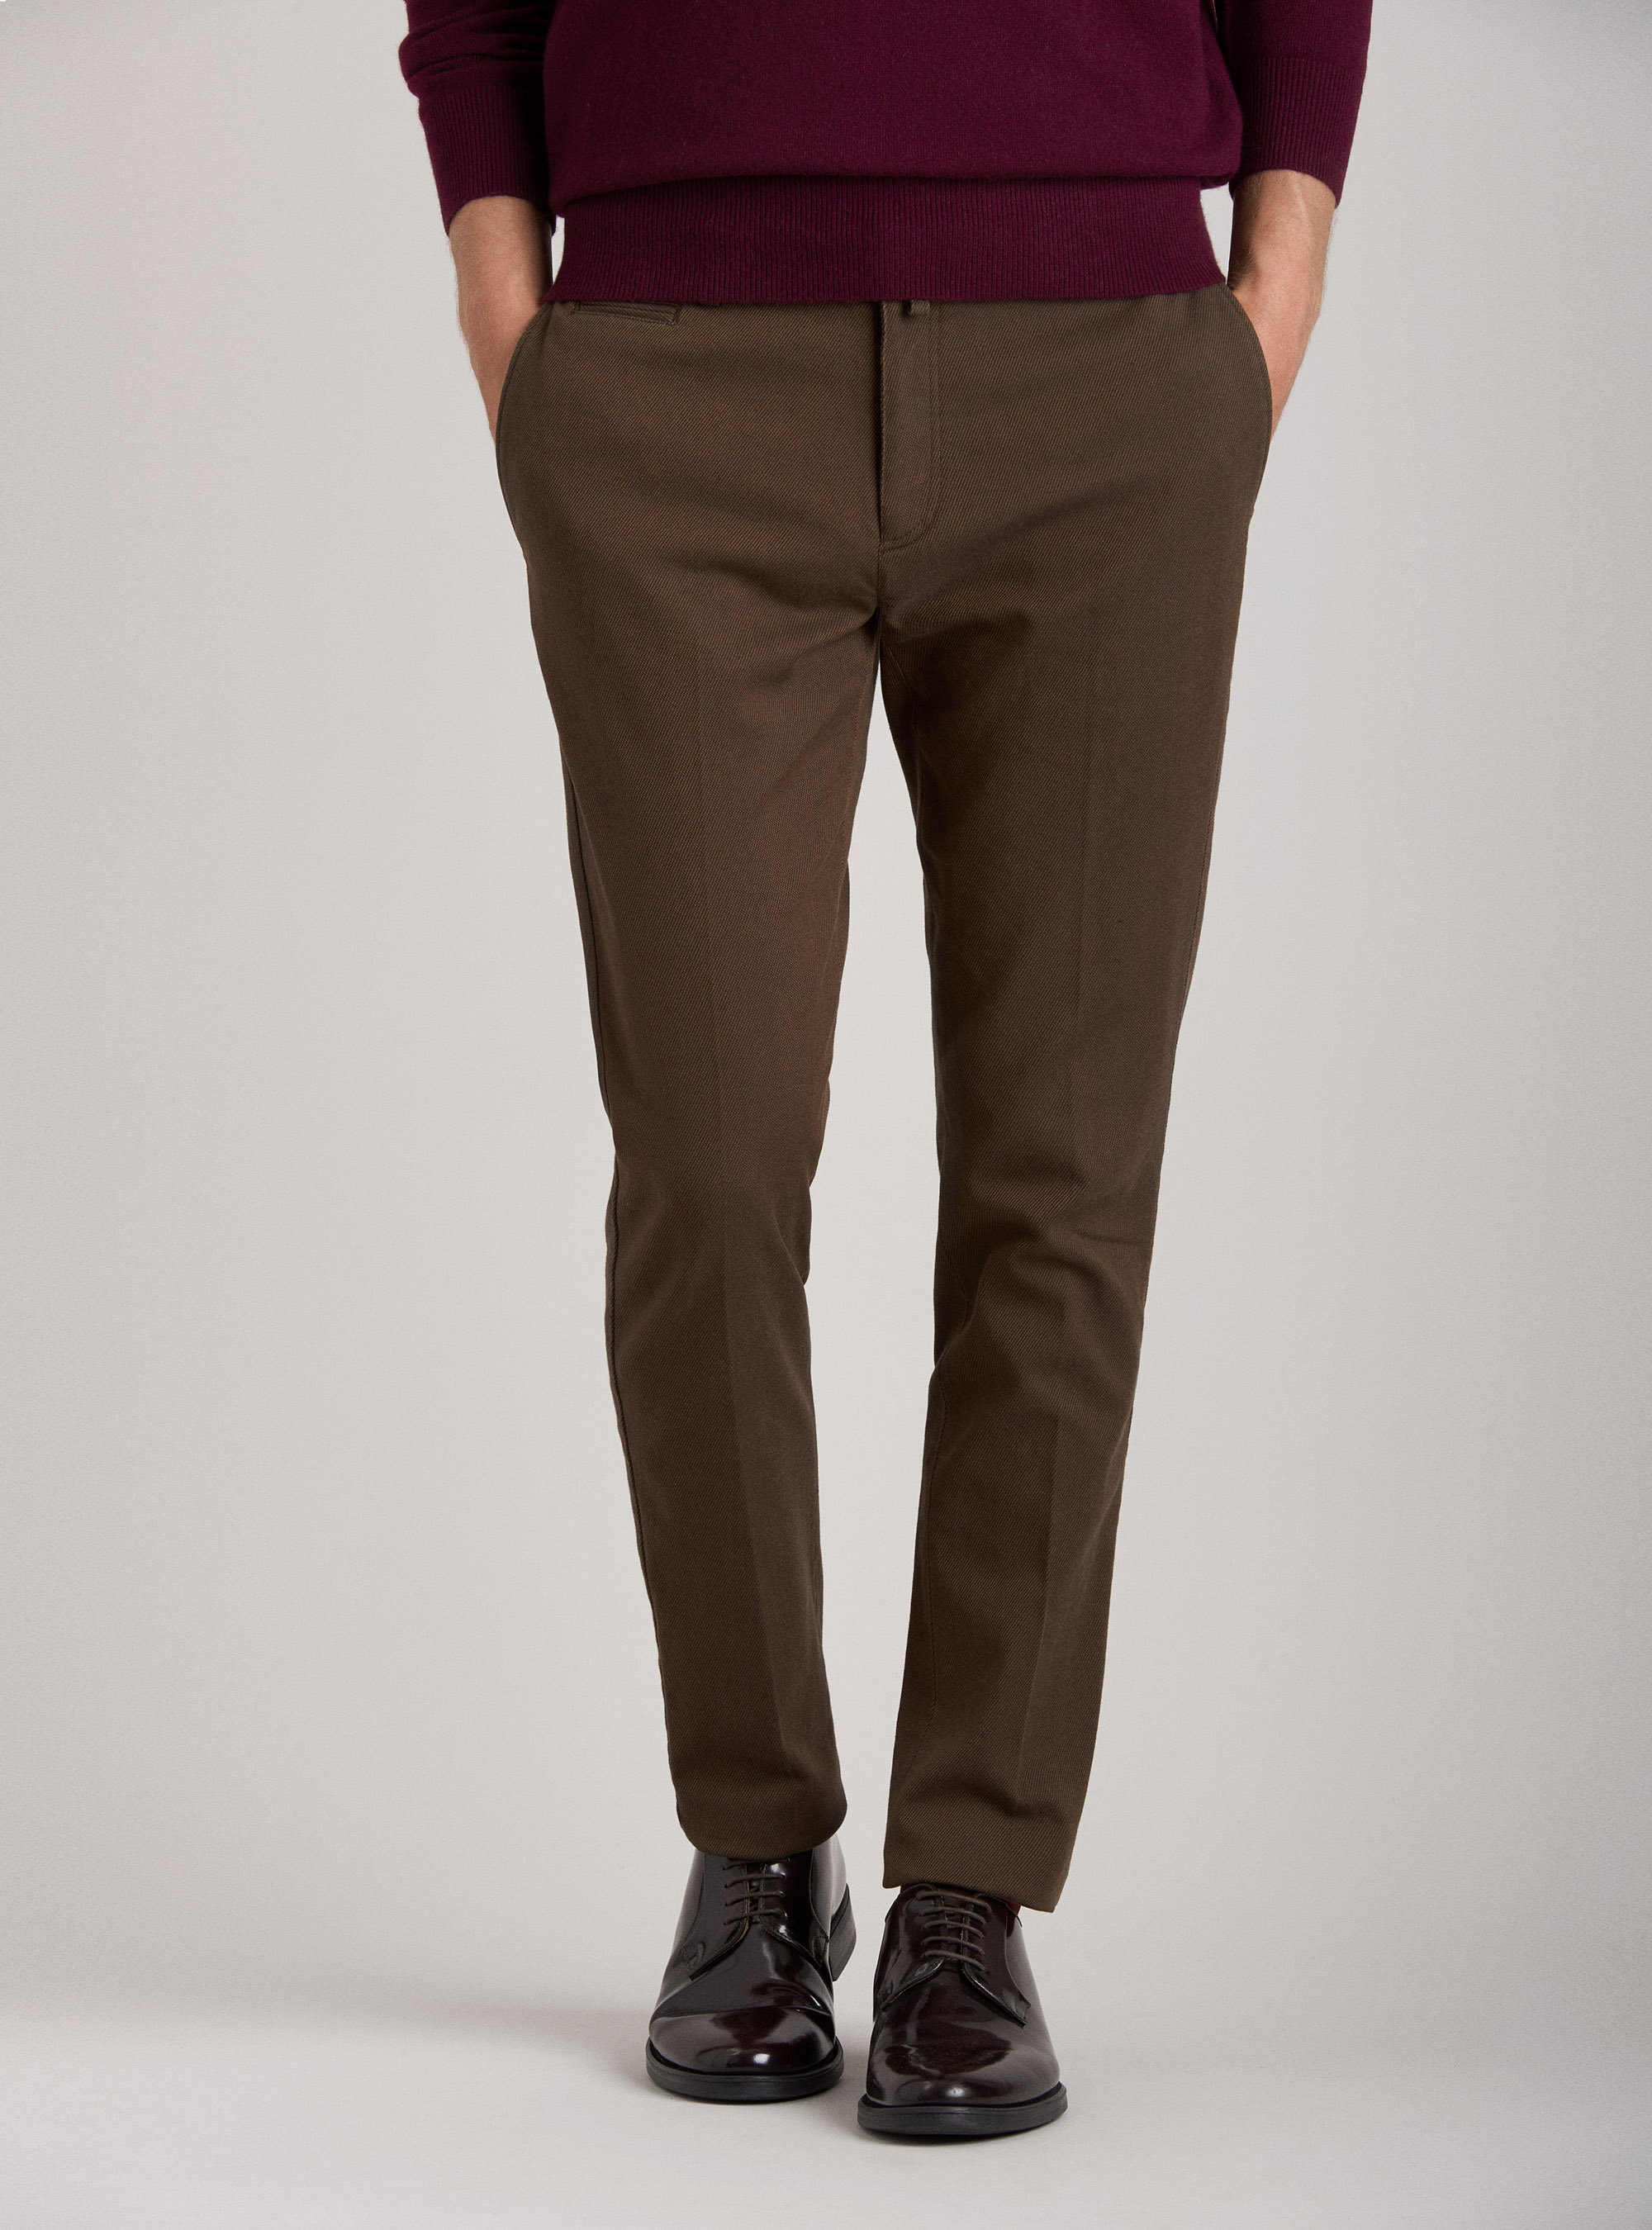 Chino slim fit stretch cotton trousers